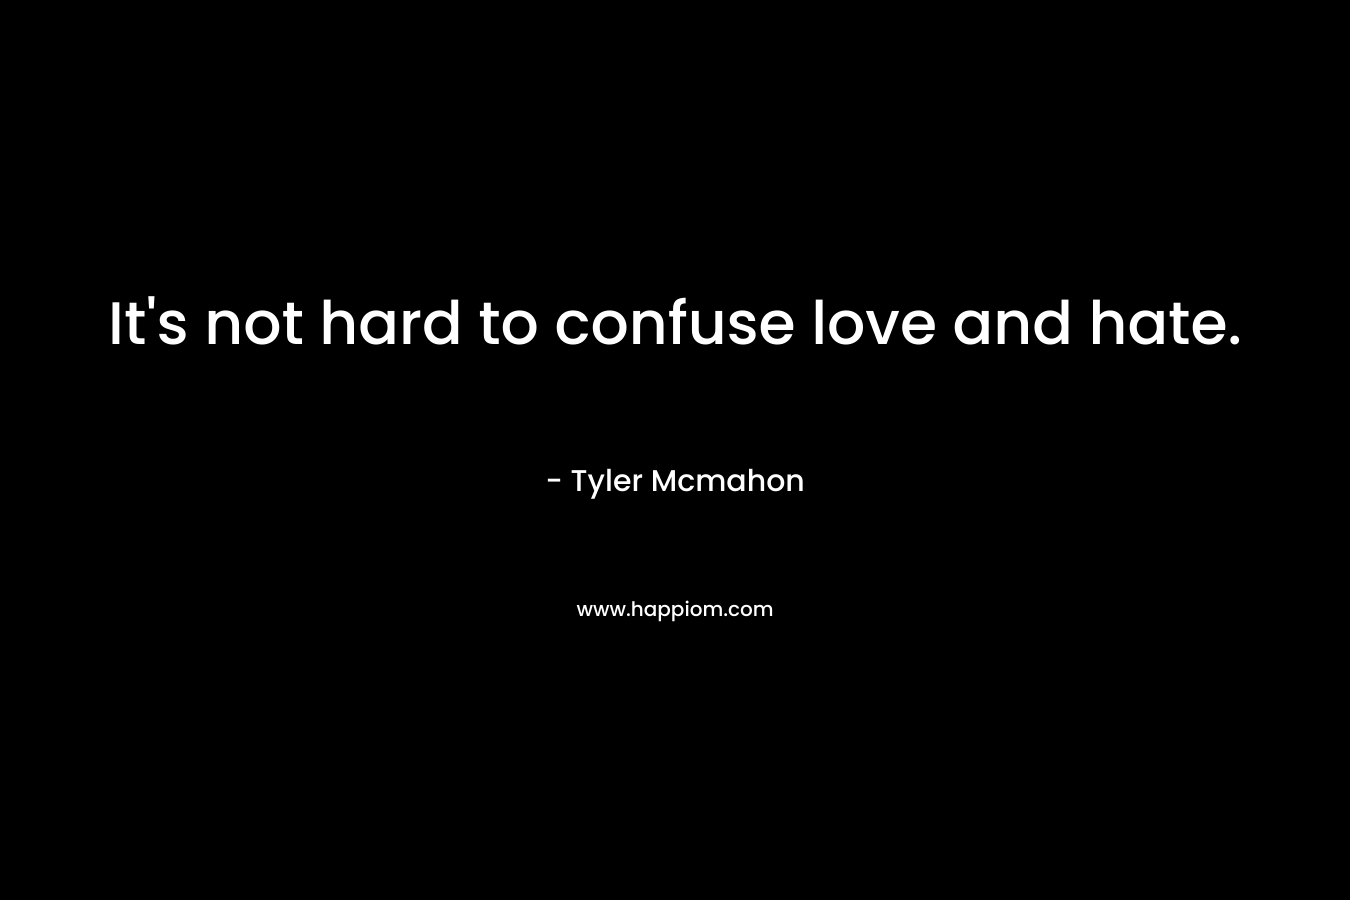 It's not hard to confuse love and hate.